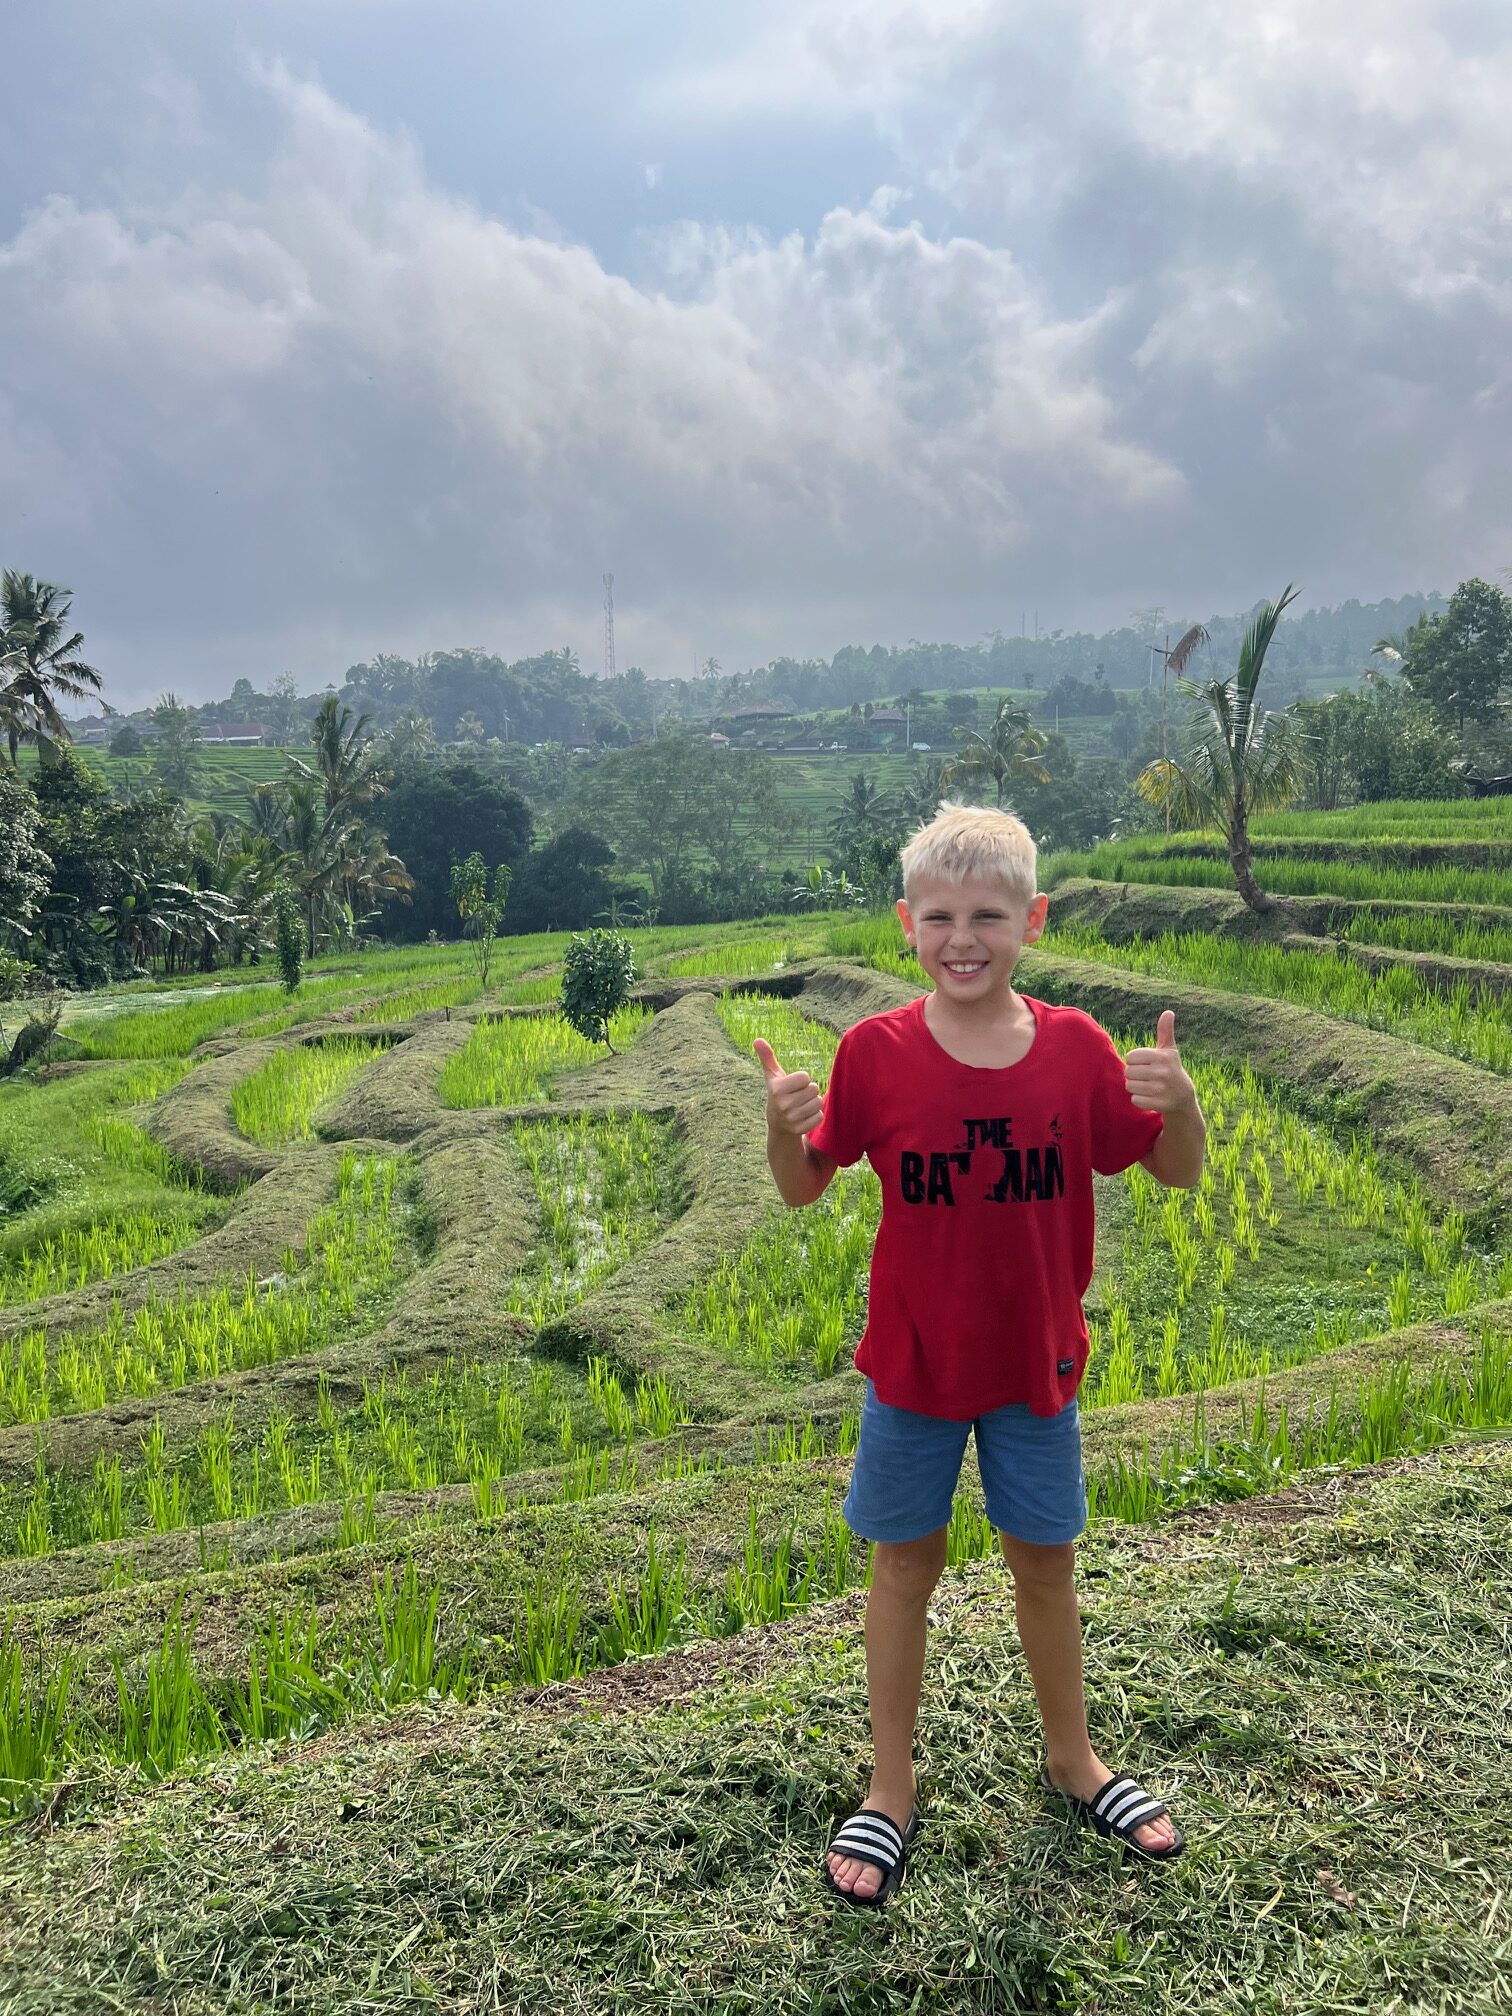 5 Great destinations to visit In Bali with Kids in 2 Days